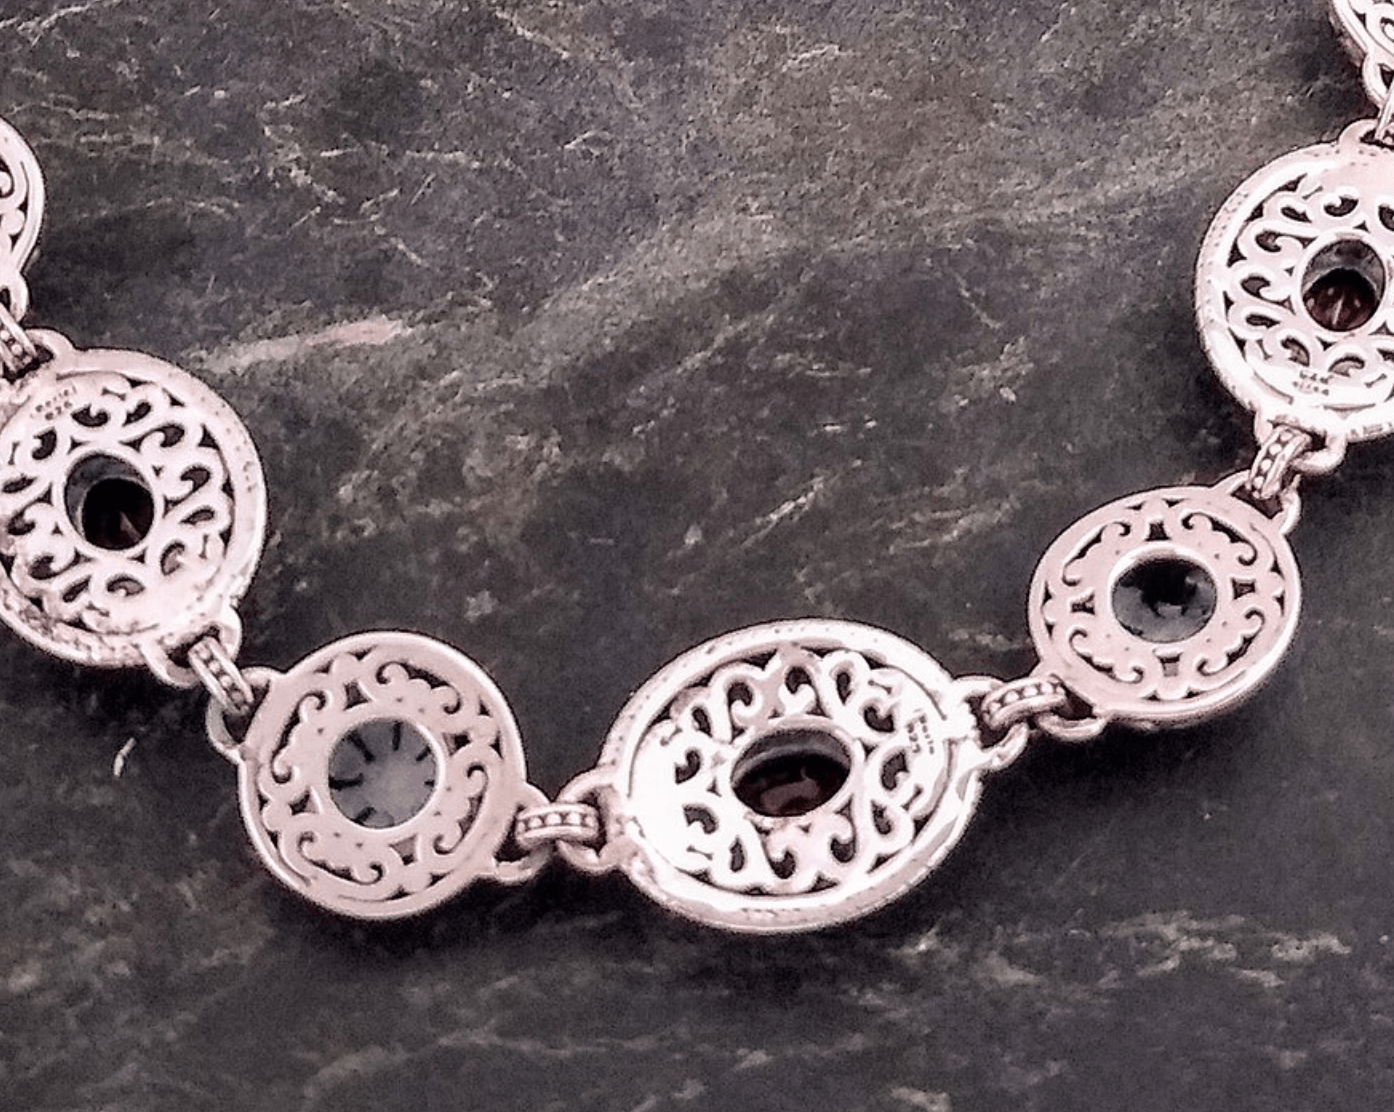 A back view of the bracelet reveals the handiwork of the skilled artisans with hand-crafted swirls underlining the silver links of the bracelet.